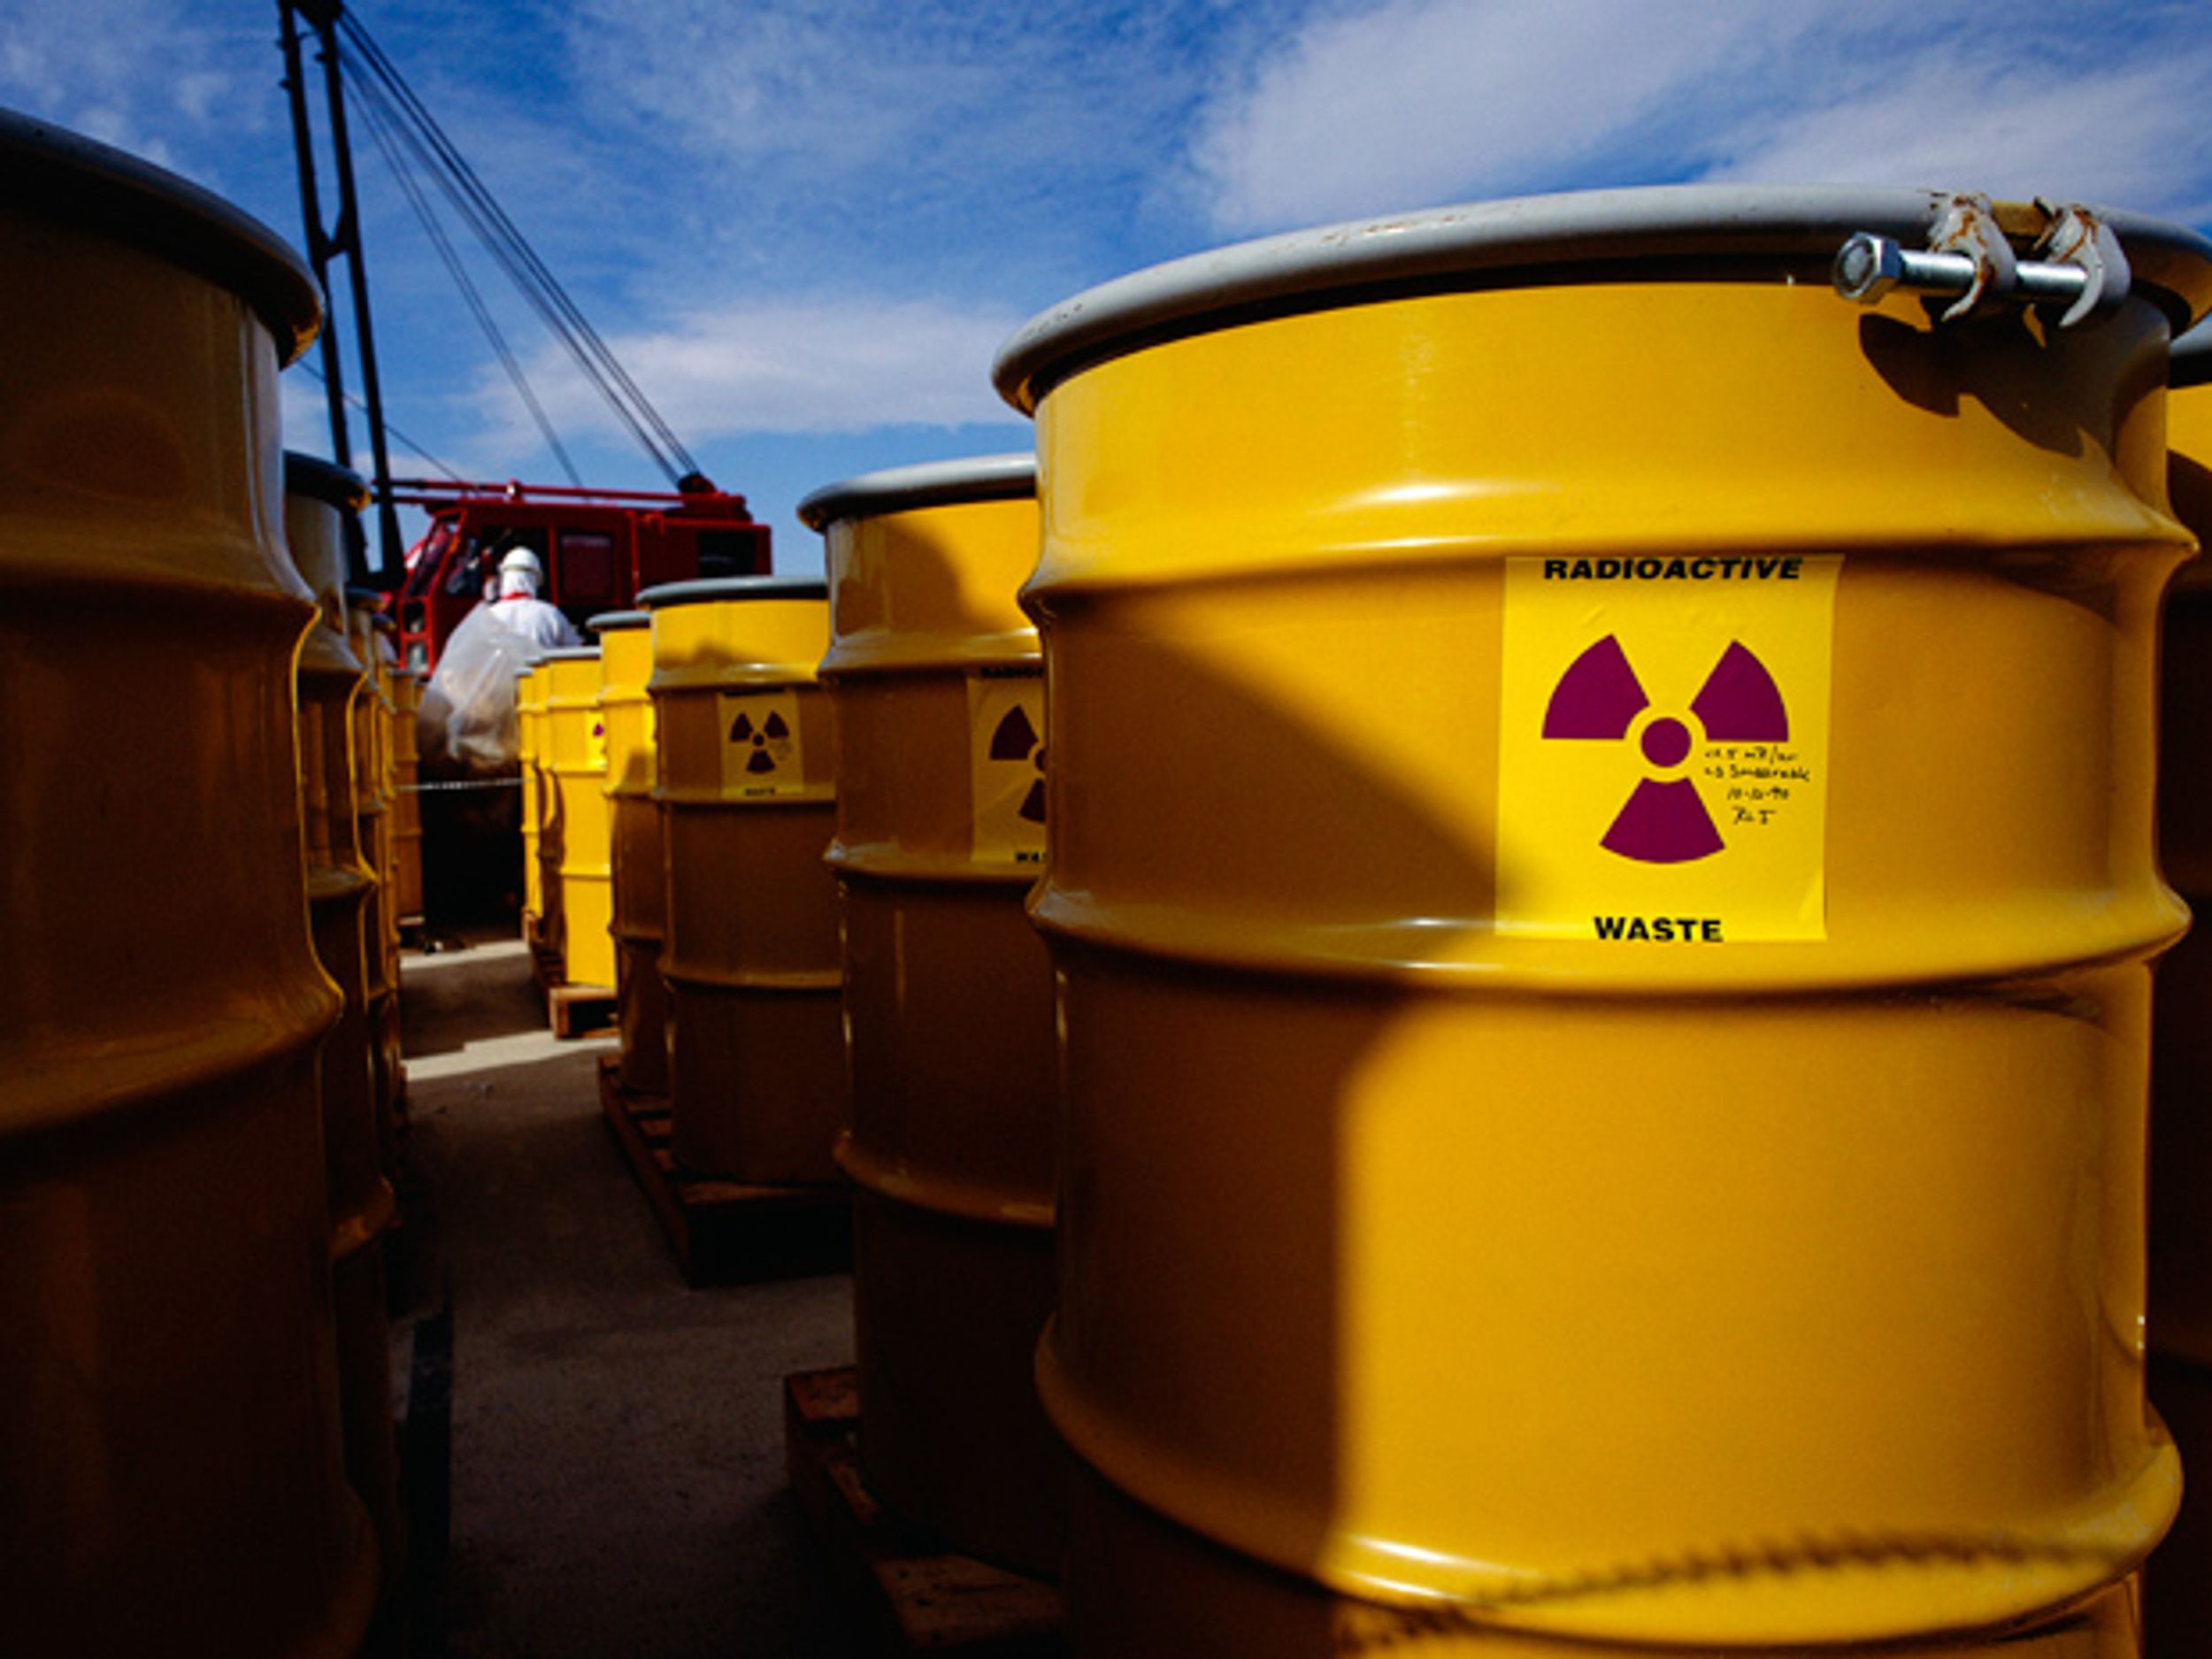 40 Percent of Hanford Nuclear Waste Would Fit in One 5-km Deep Borehole